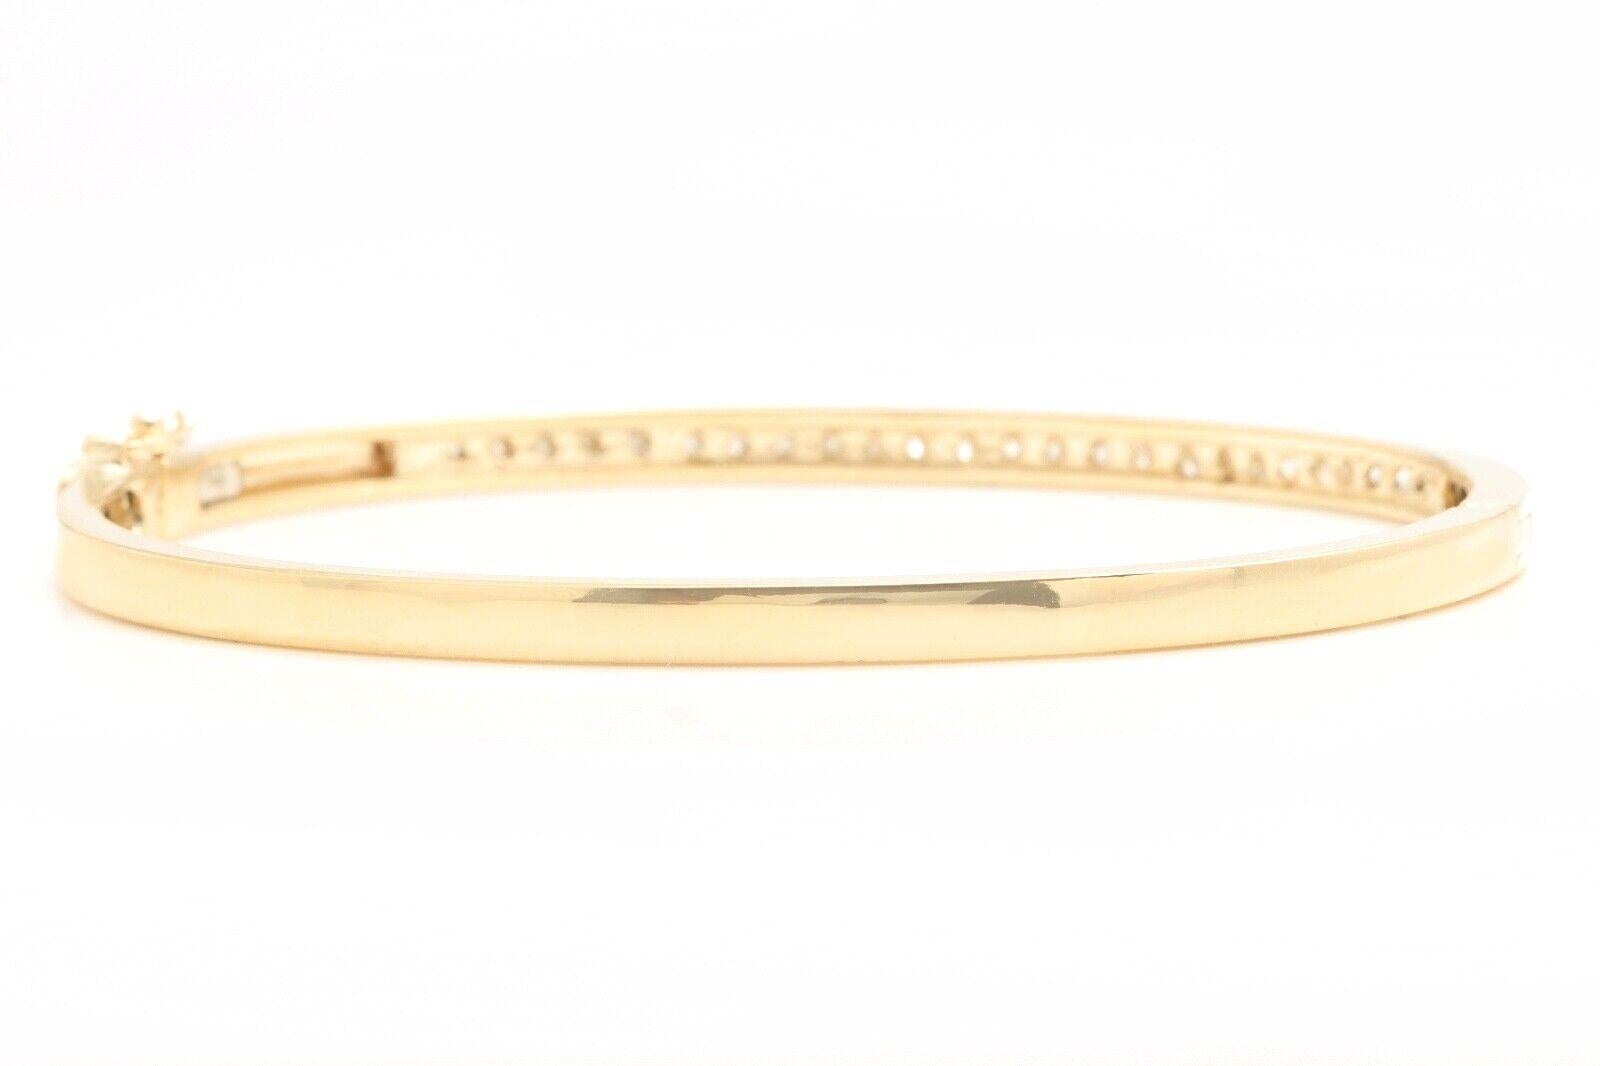 Very Impressive 1.40 Carats Natural Diamond 14K Solid Yellow Gold Bangle Bracelet 

Suggested Replacement Value: Approx. $6,000.00

STAMPED: 14K

Total Natural Round Diamonds Weight: Approx. 1.40 Carats (color G-H / Clarity SI)

Bangle Wrist Size